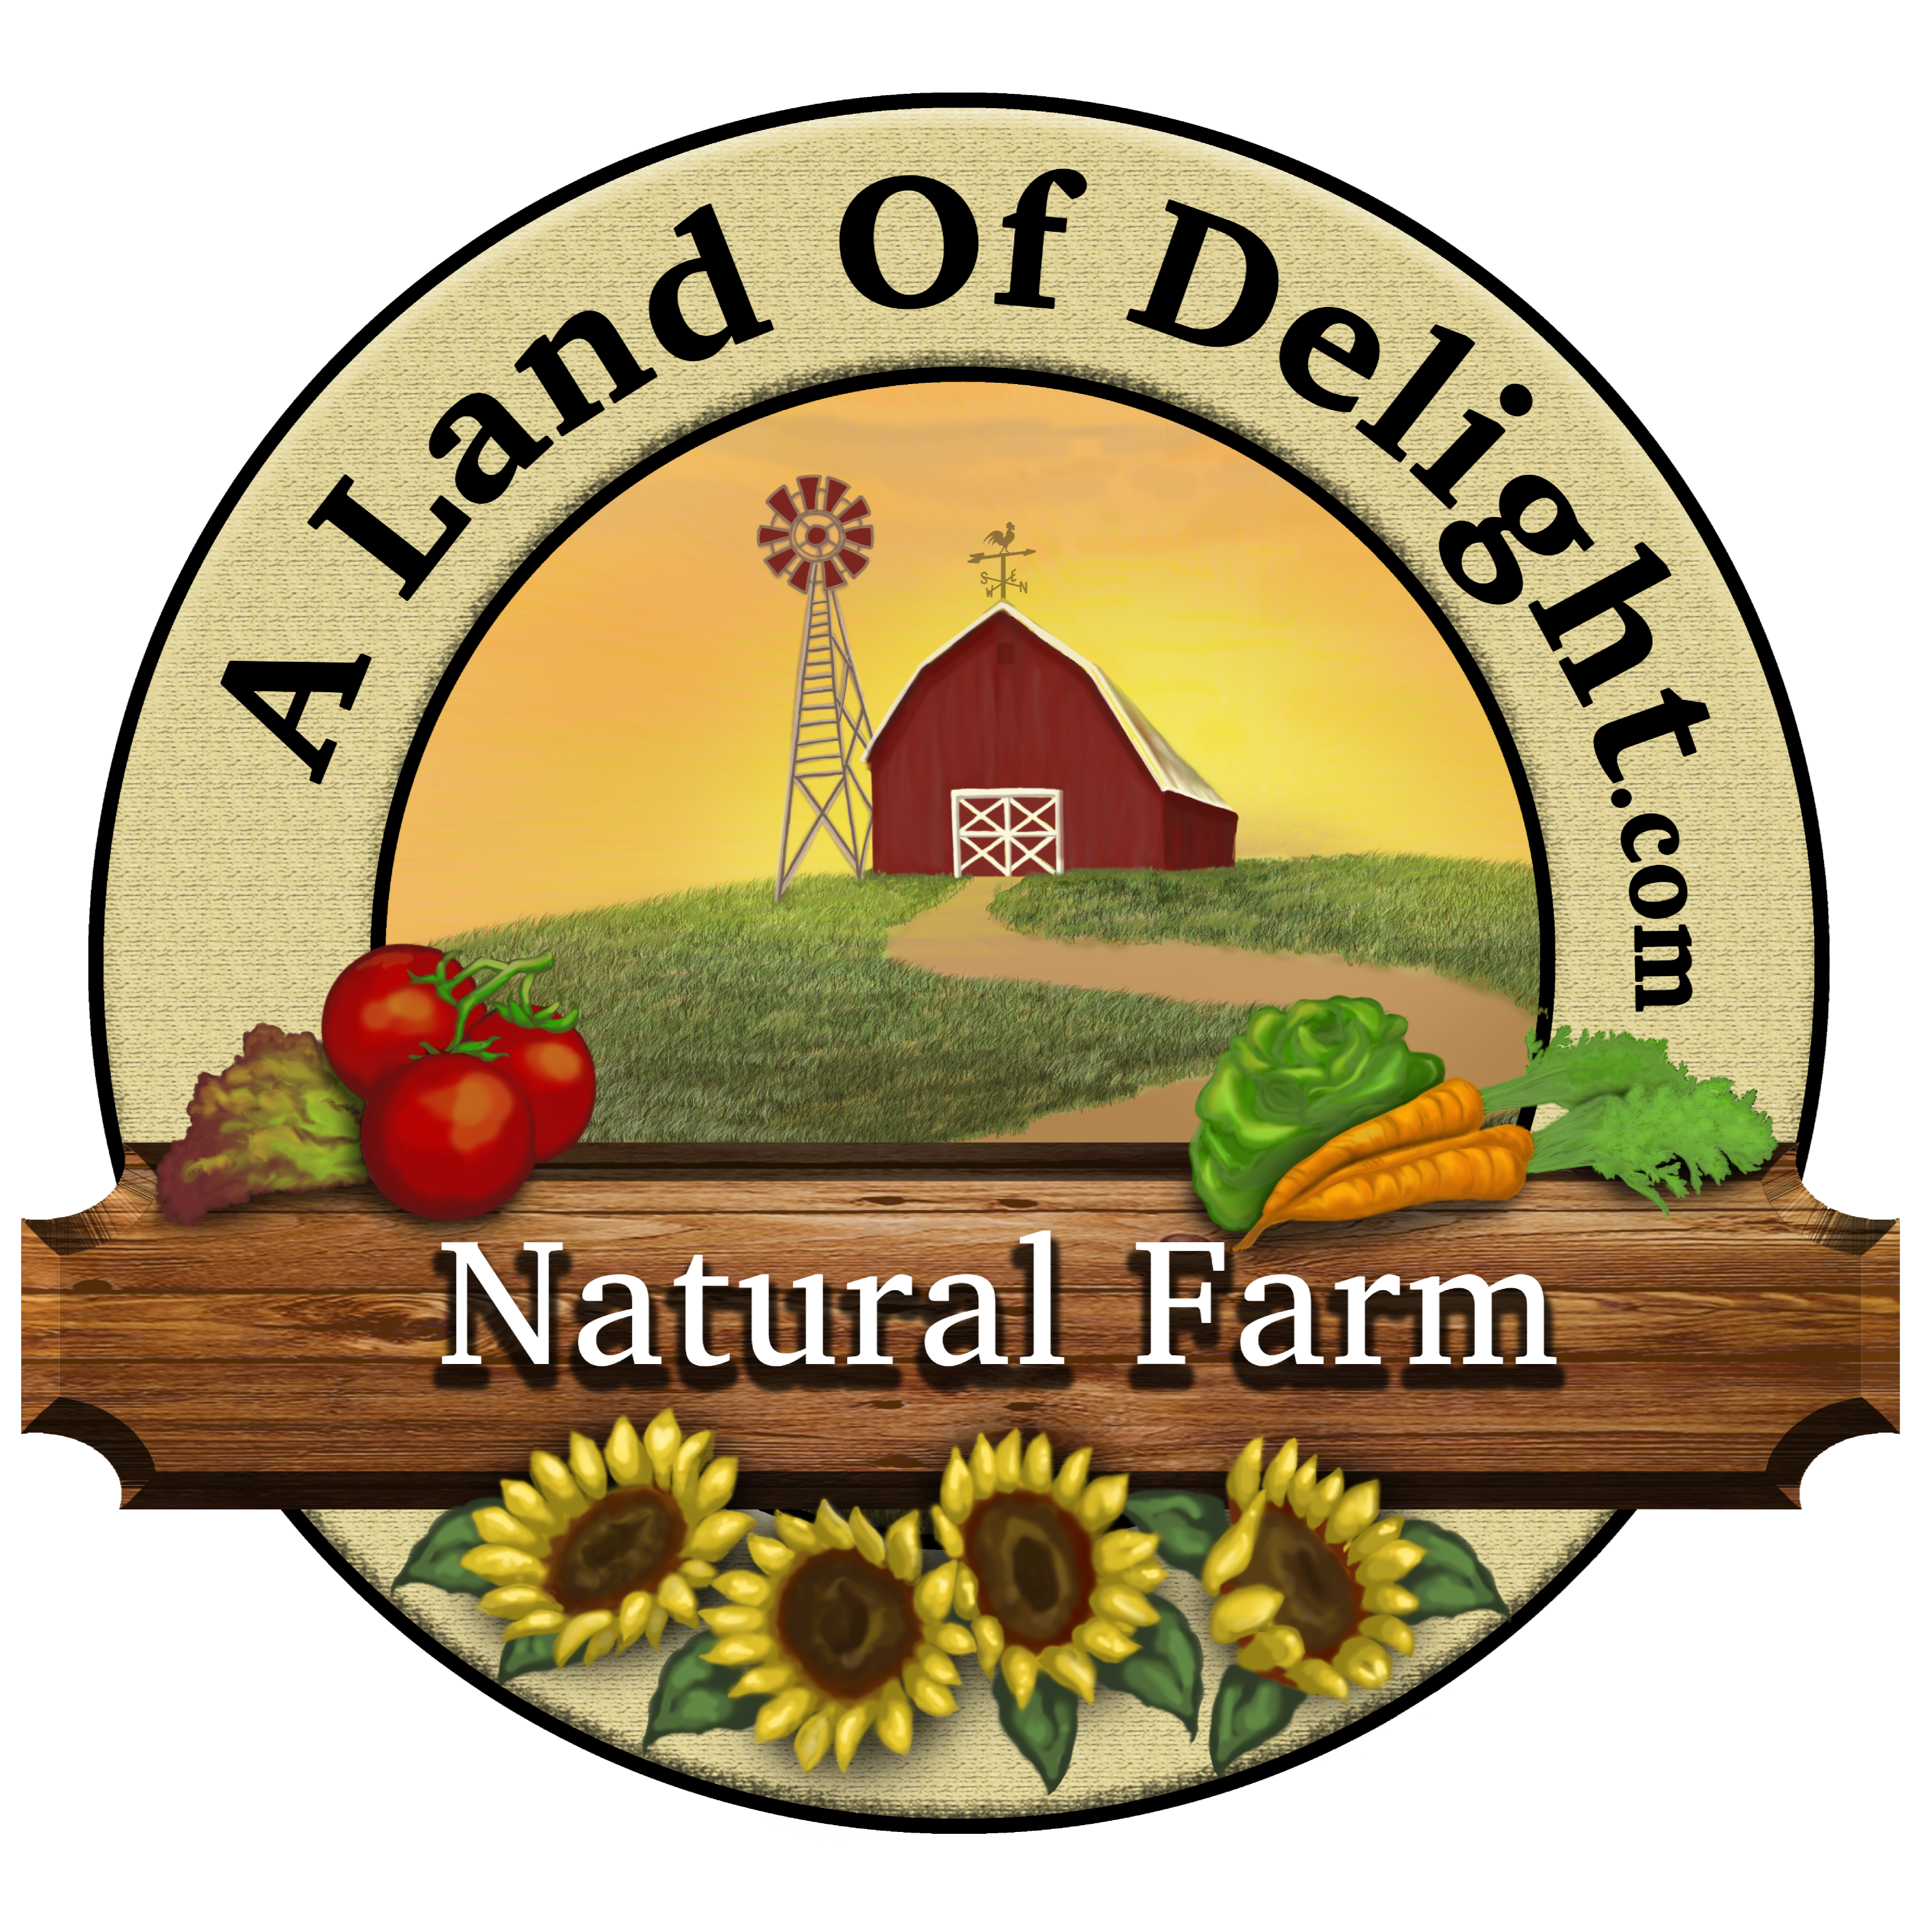 Gate clipart organic garden. Find local nuts agrilicious